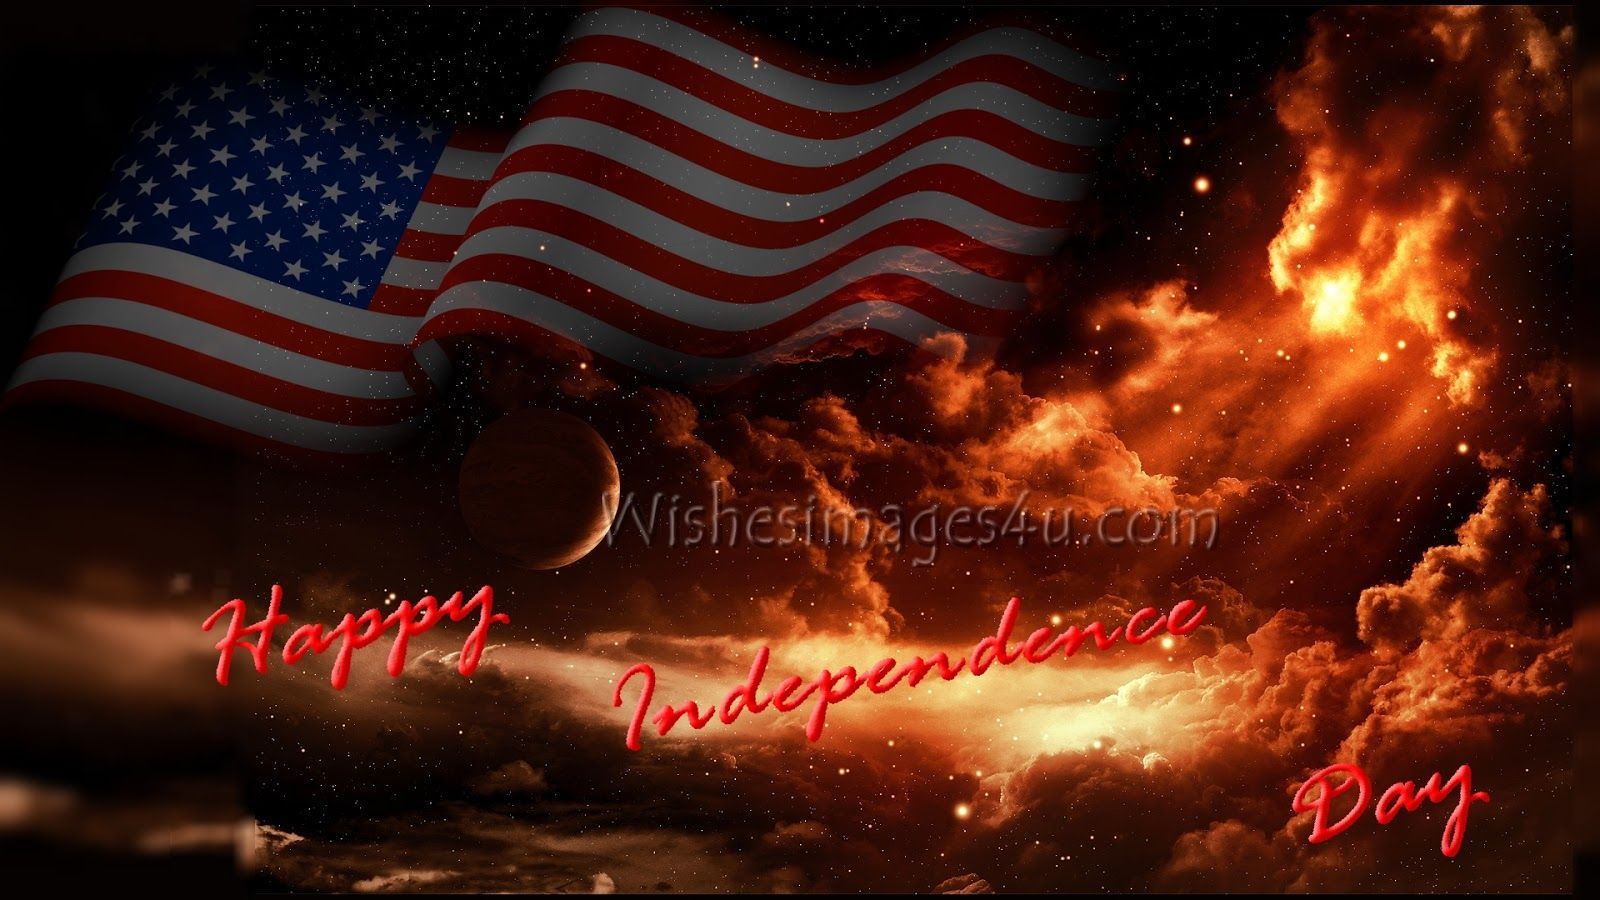 Happy 4th of July Image 2018. Fourth of July Image, Photo, Picture, Pics, Wallpaper Free Dth of july image, Independence day image, Memorial day quotes